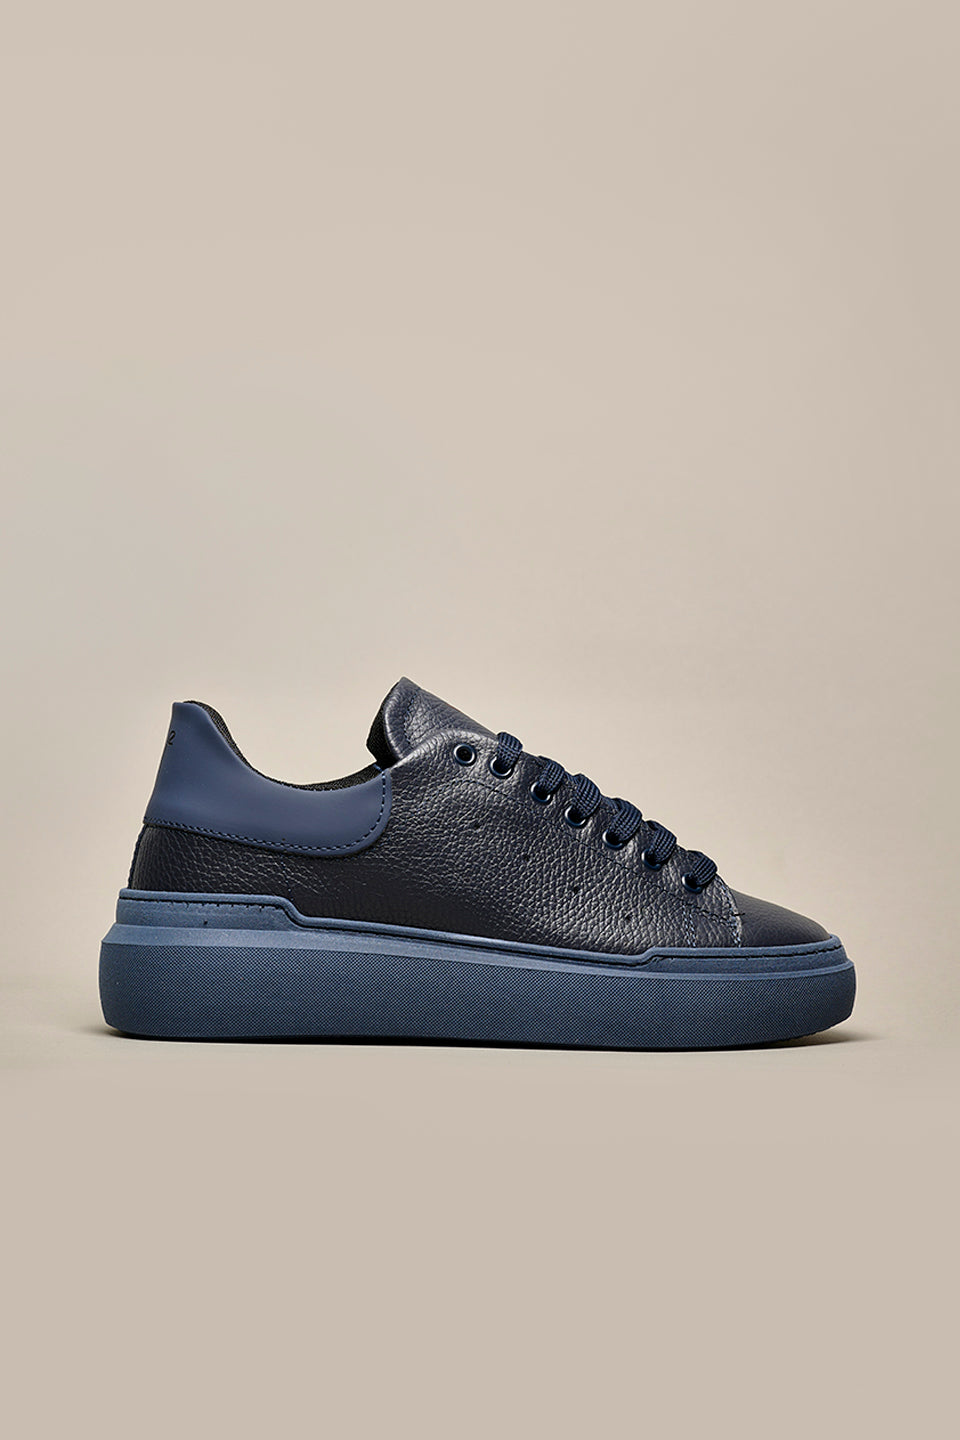 HAMMER - Blue textured leather high-sole sneakers